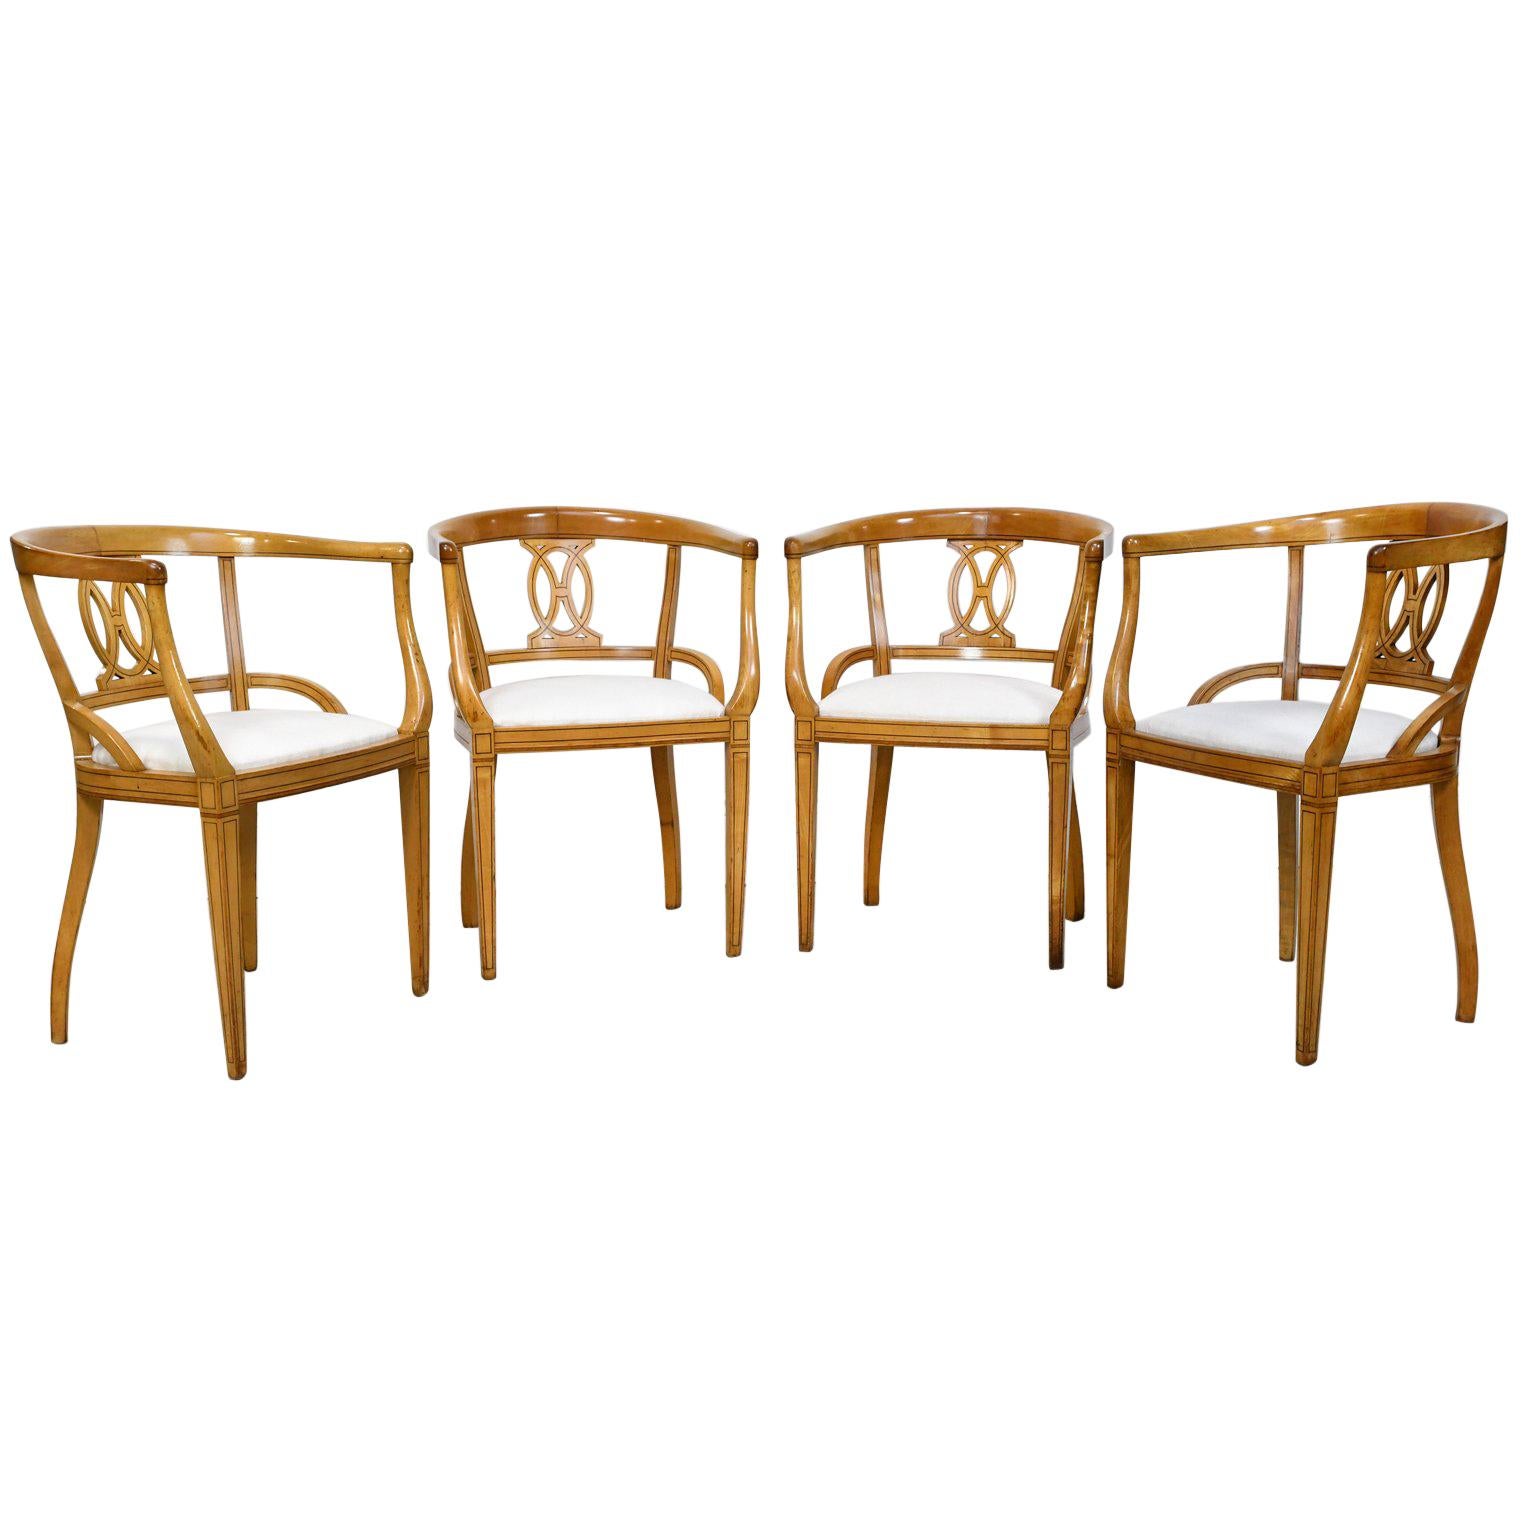 A set of four very handsome Scandinavian Biedermeier armchairs in blond birchwood with barrel-back and tapered legs, circa 1830. Chairs feature ebonized wood, line inlays that accentuates the geometrical pattern on the carved back-splat and